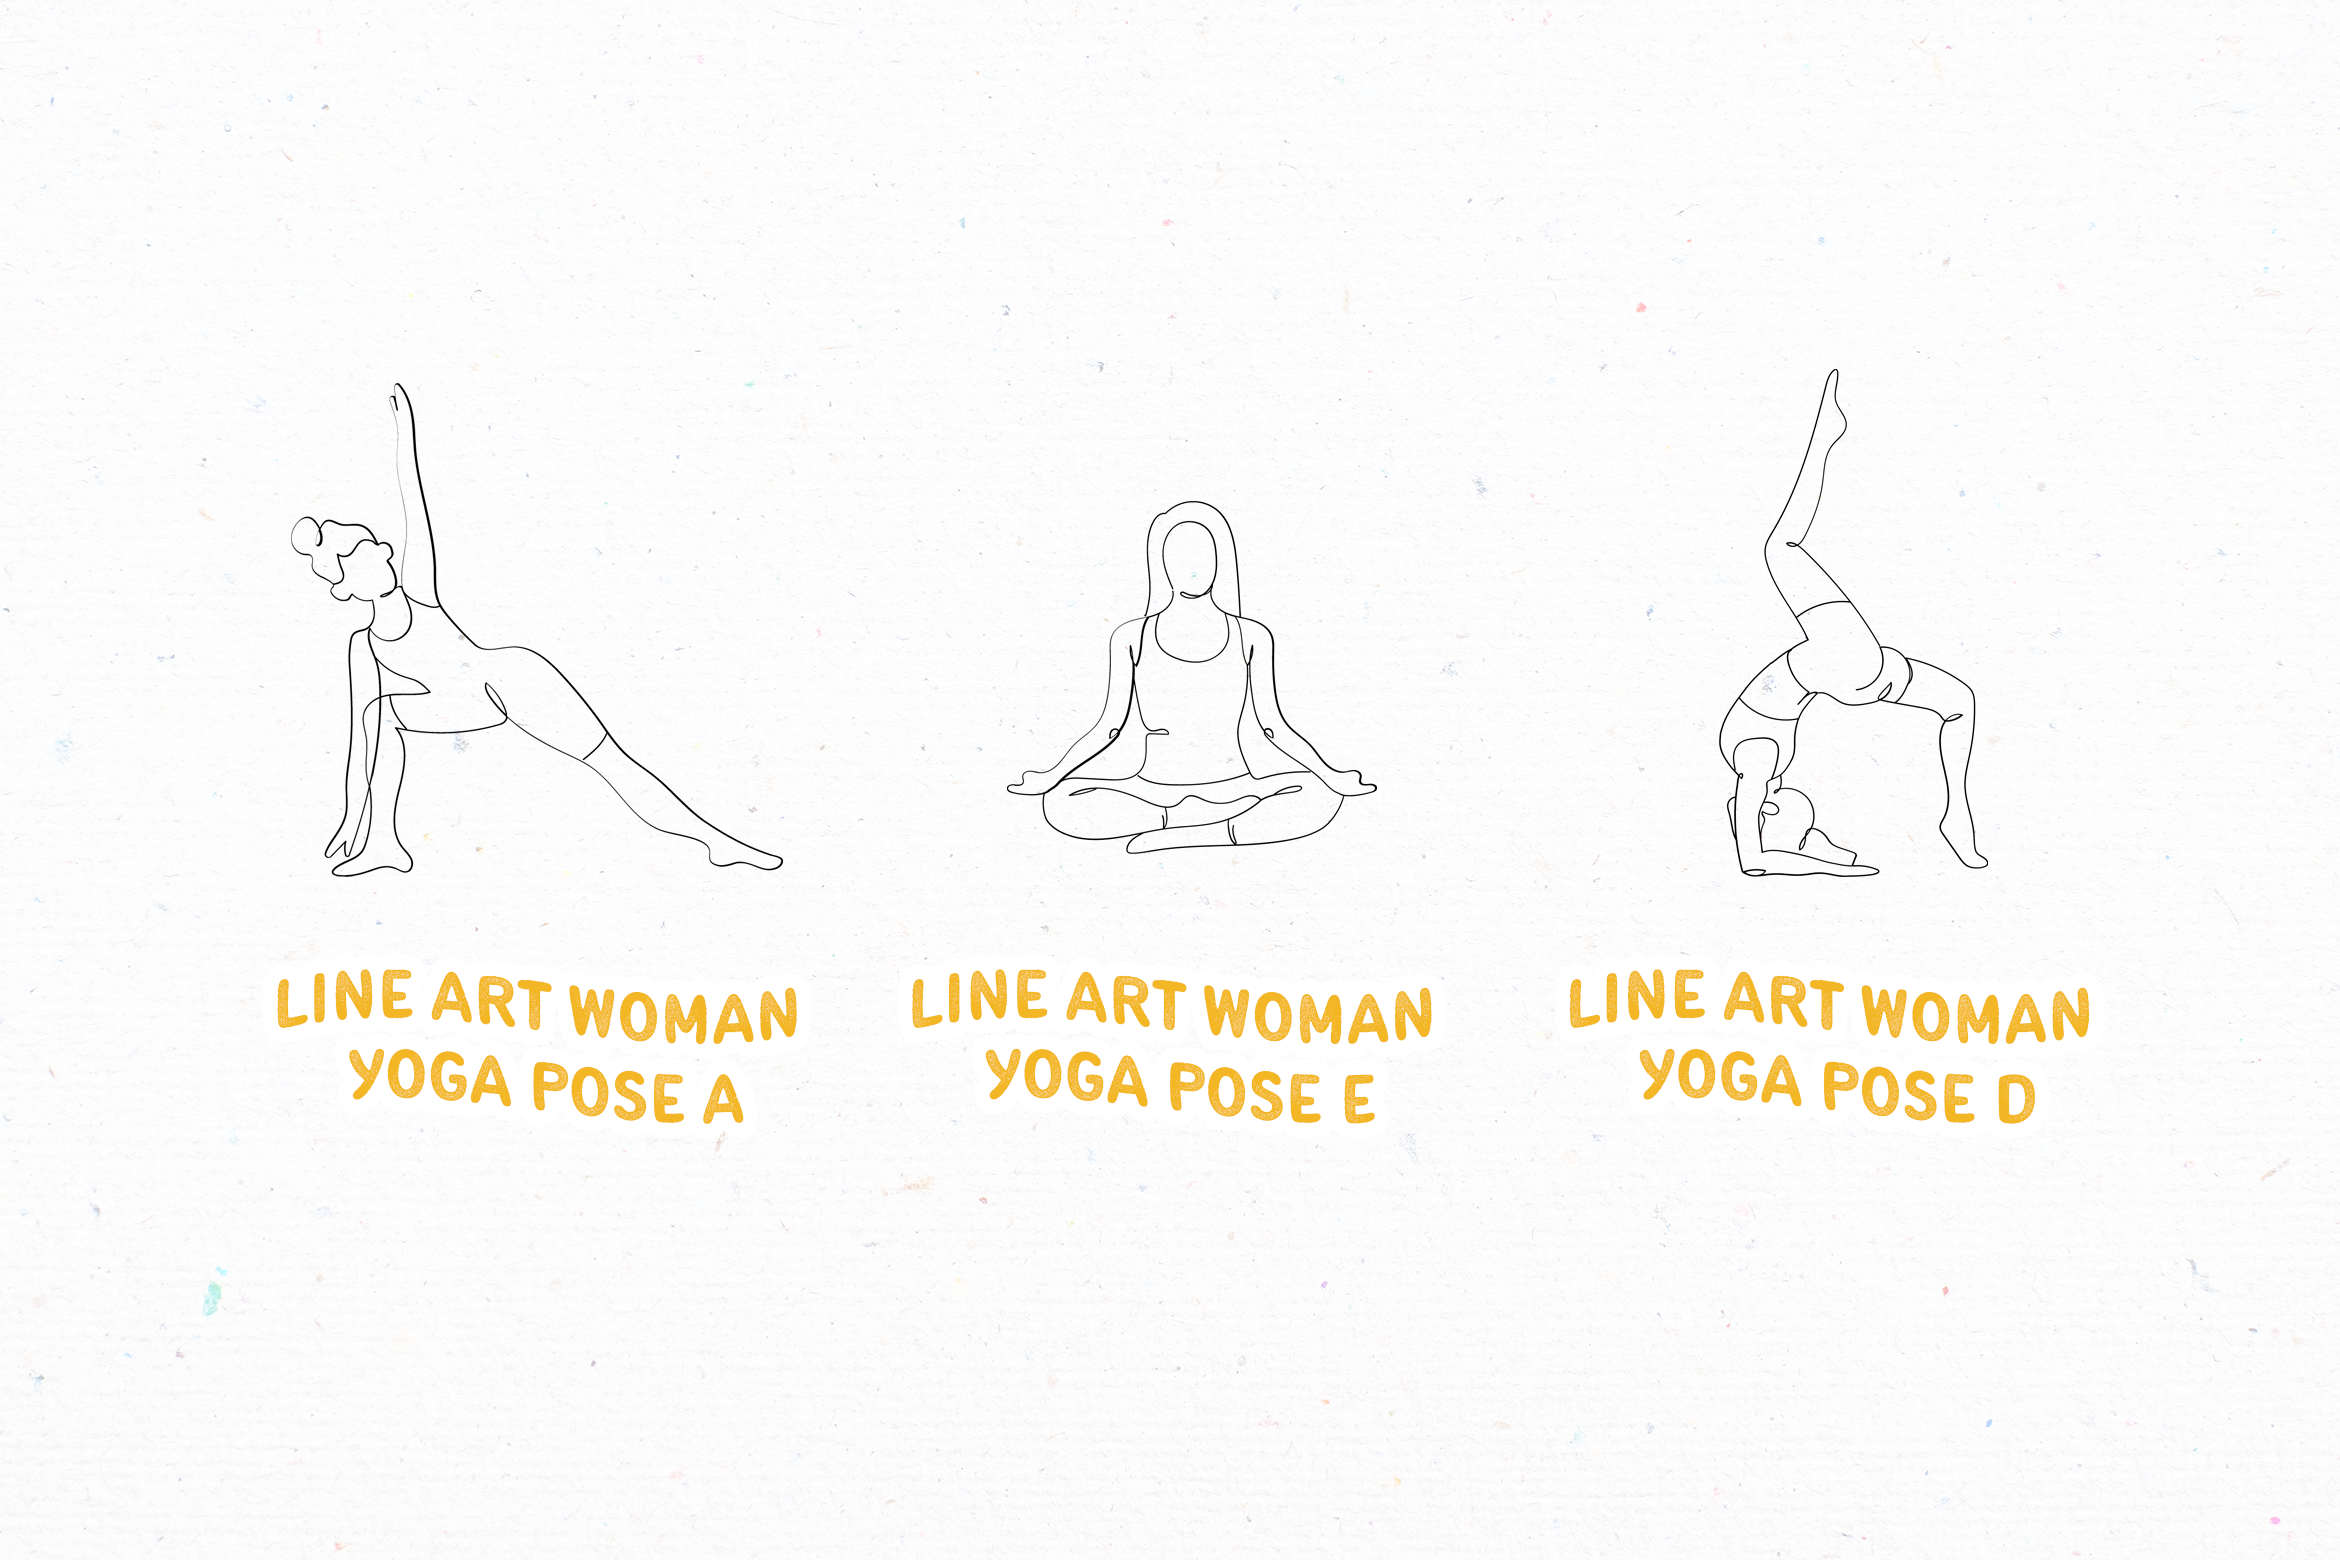 Yoga poses Outline Drawing Images, Pictures